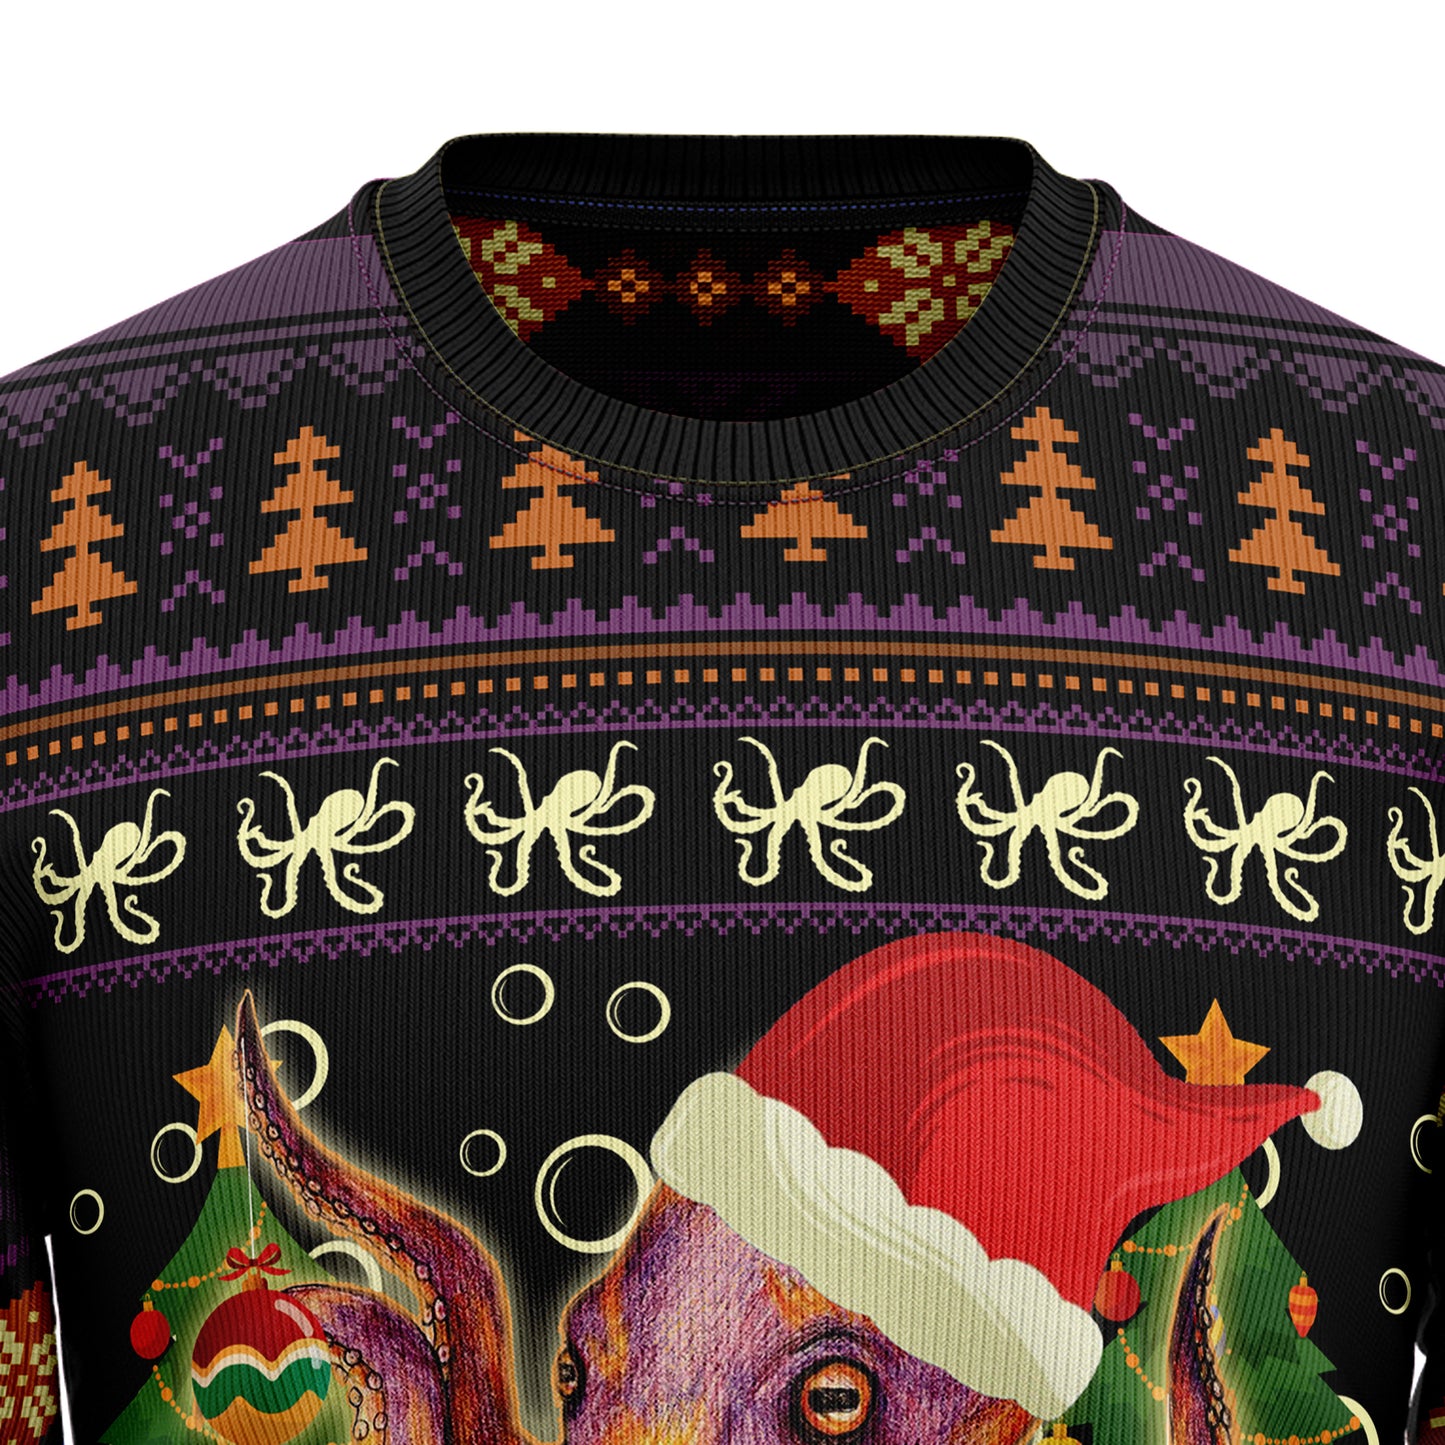 Octopus Ornament TG5106 Ugly Christmas Sweater